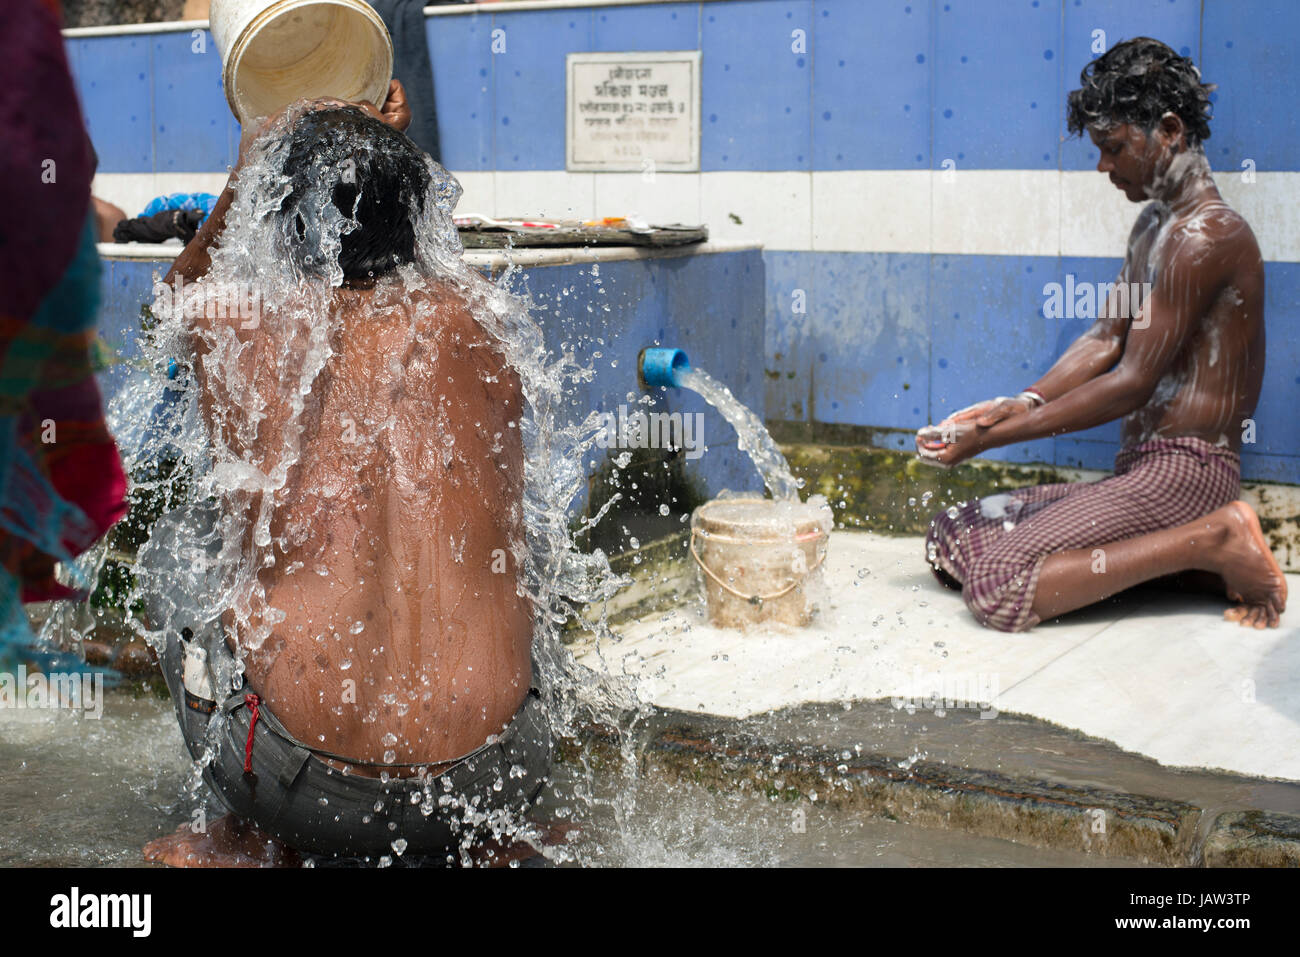 Two men bathe themselves at a roadside bathing place in Kolkata (Calcutta), West Bengal, India Stock Photo